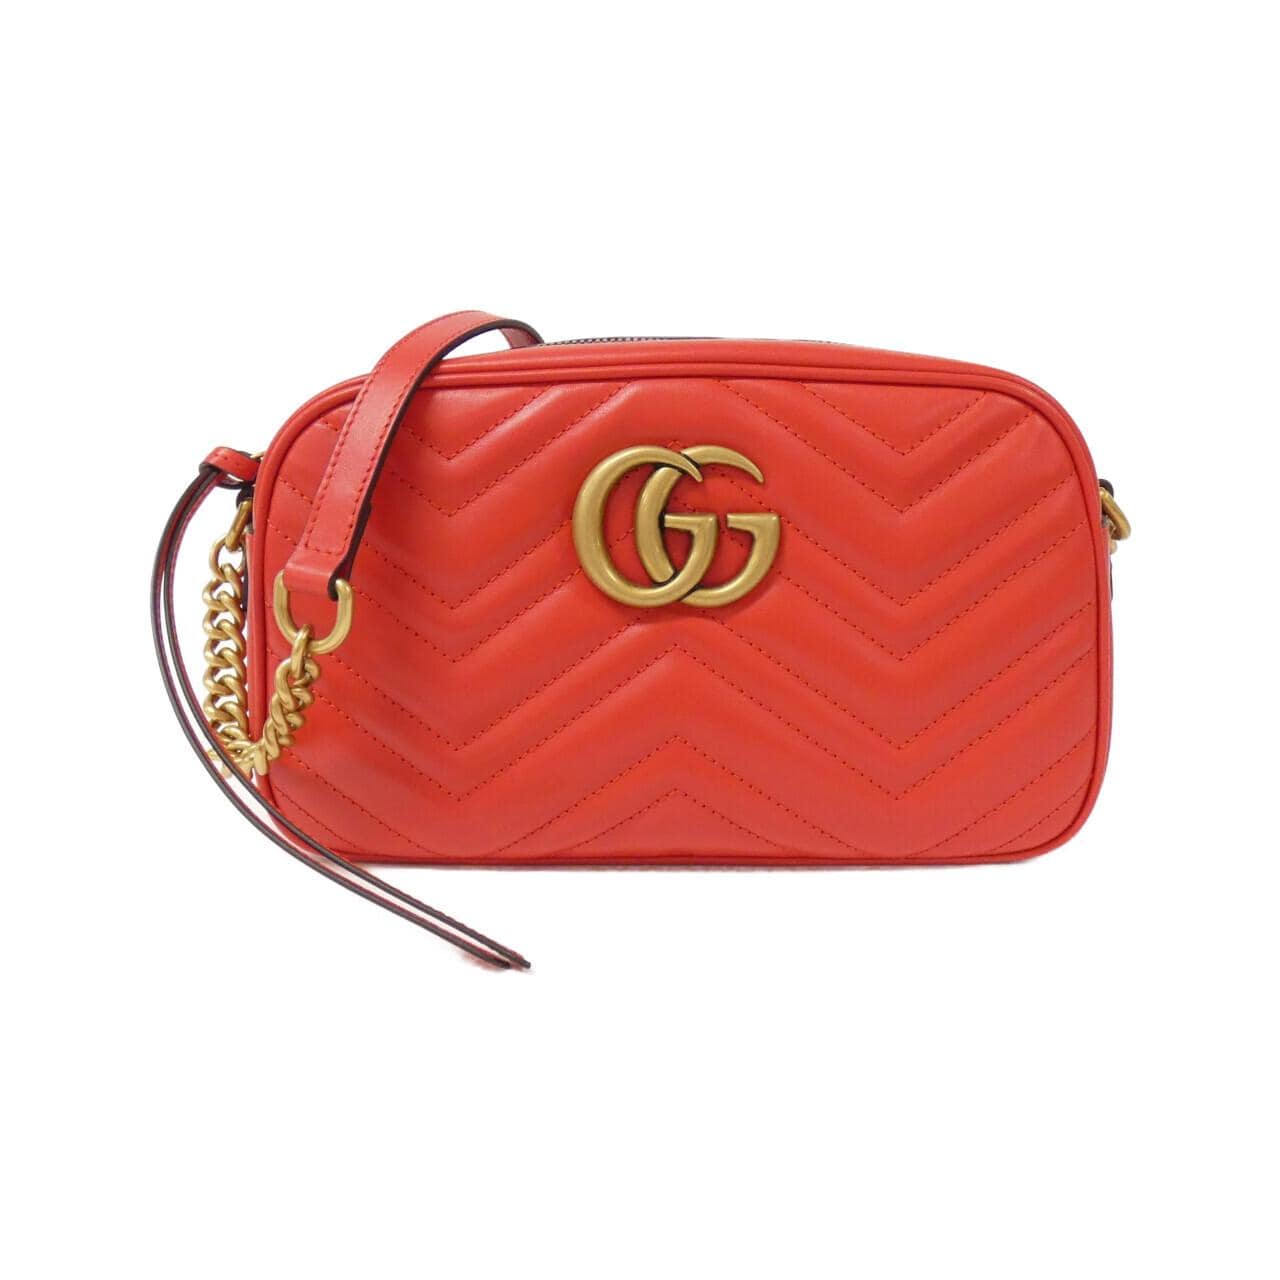 [BRAND NEW] Gucci GG MARMONT 447632 AABZB Shoulder Bag